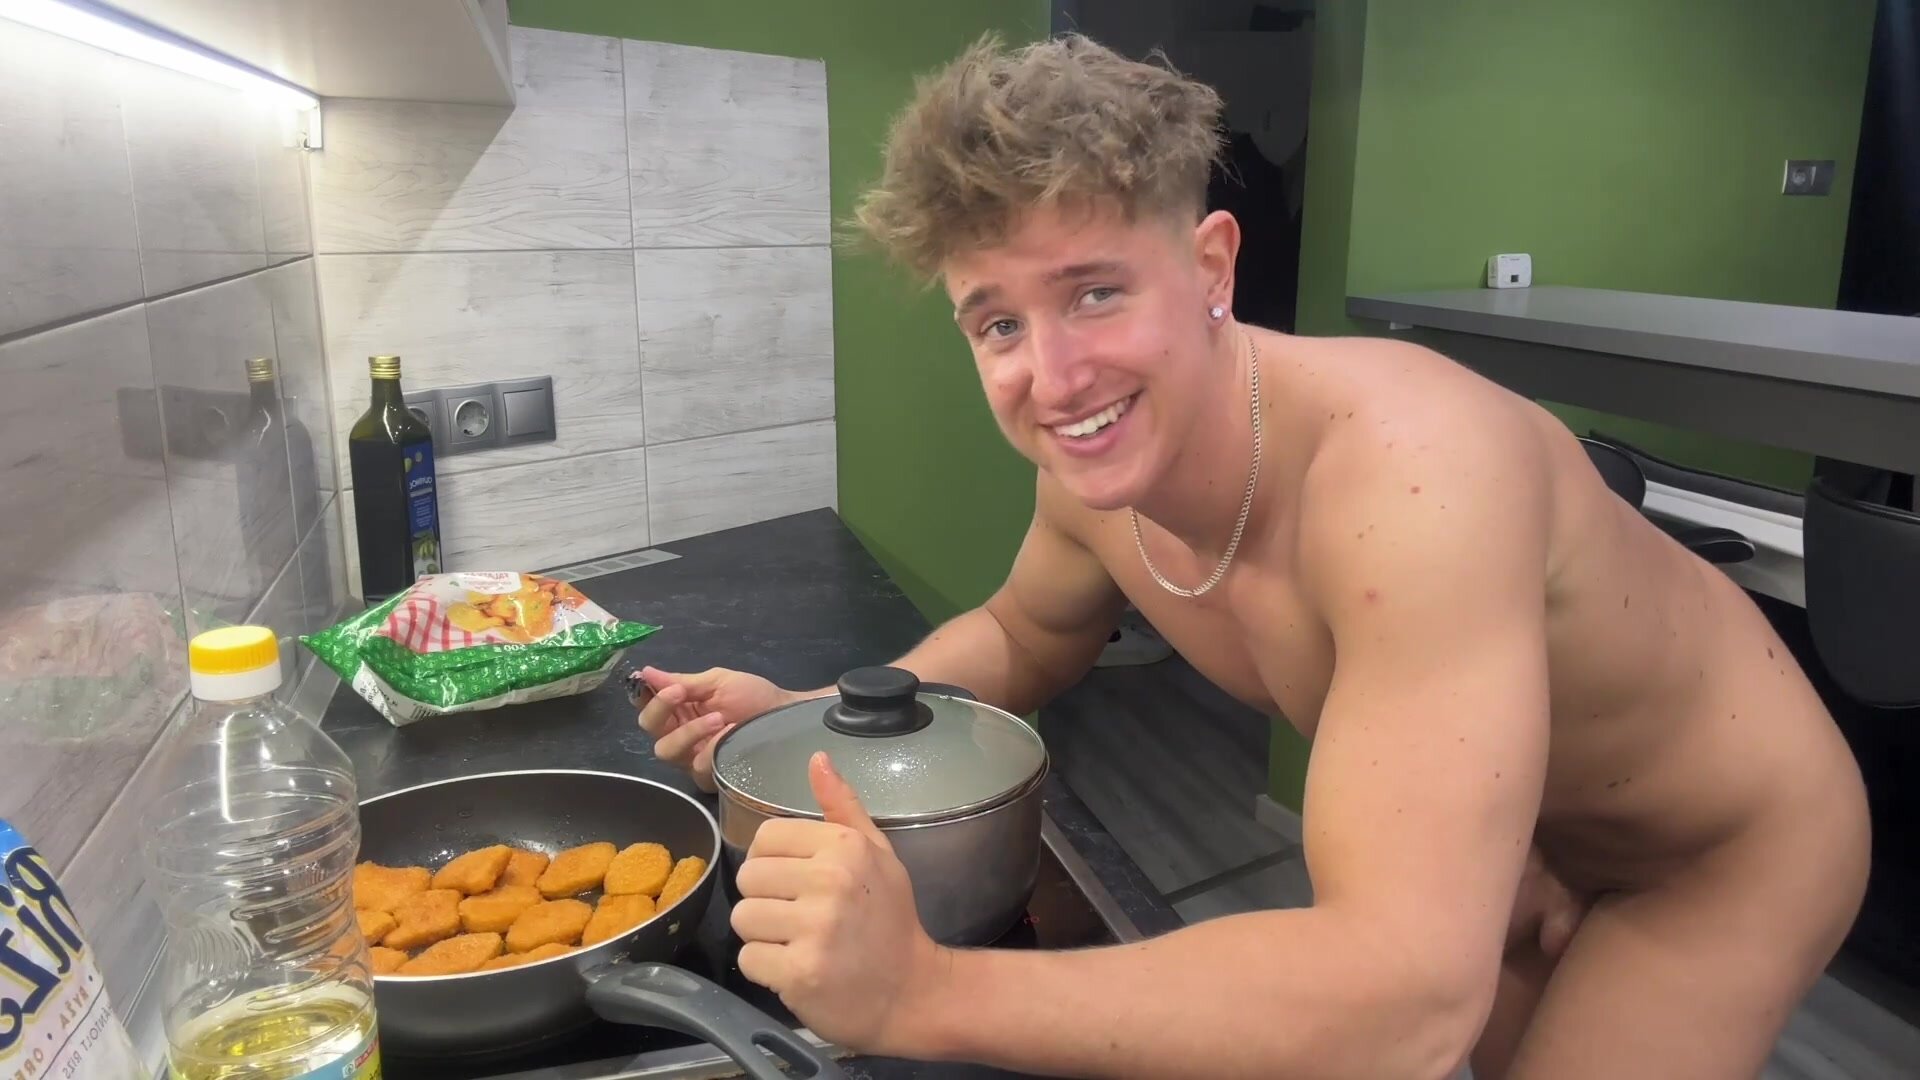 young naked cook